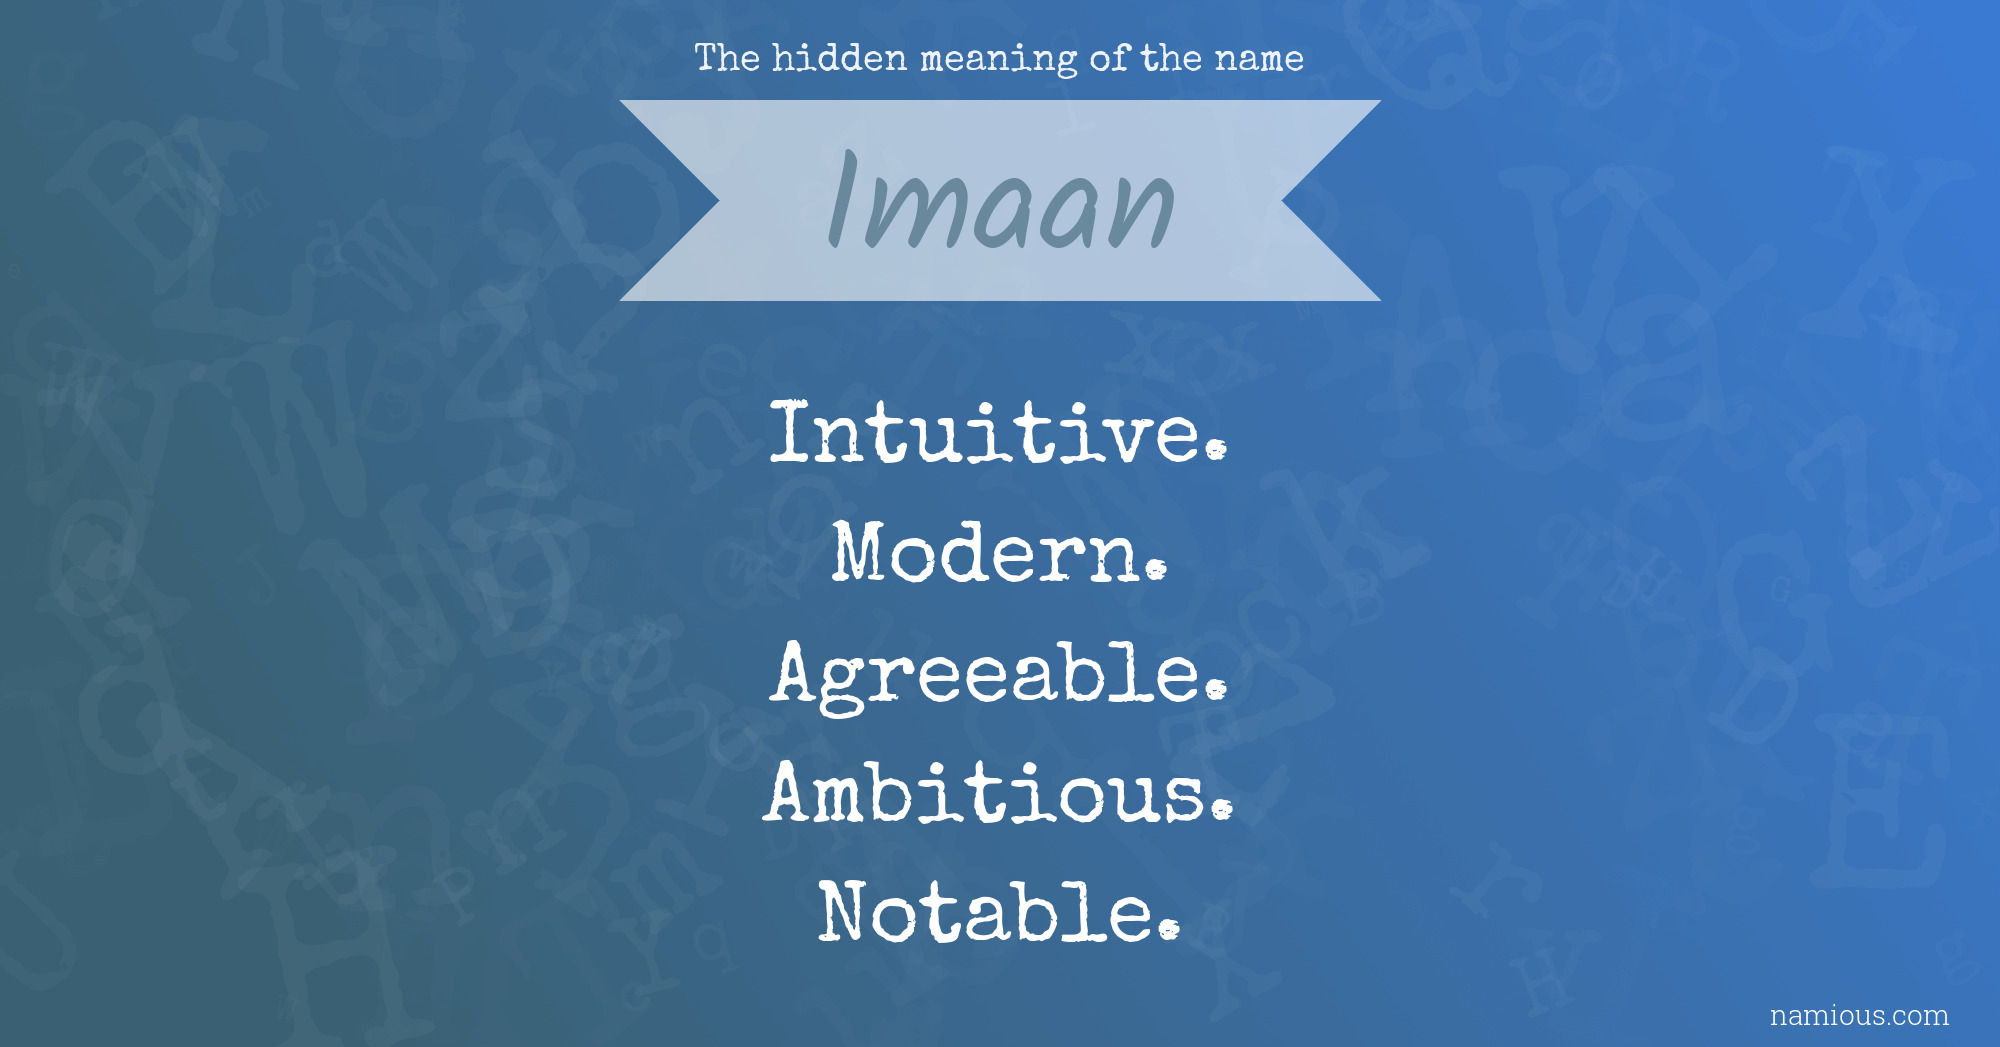 The hidden meaning of the name Imaan